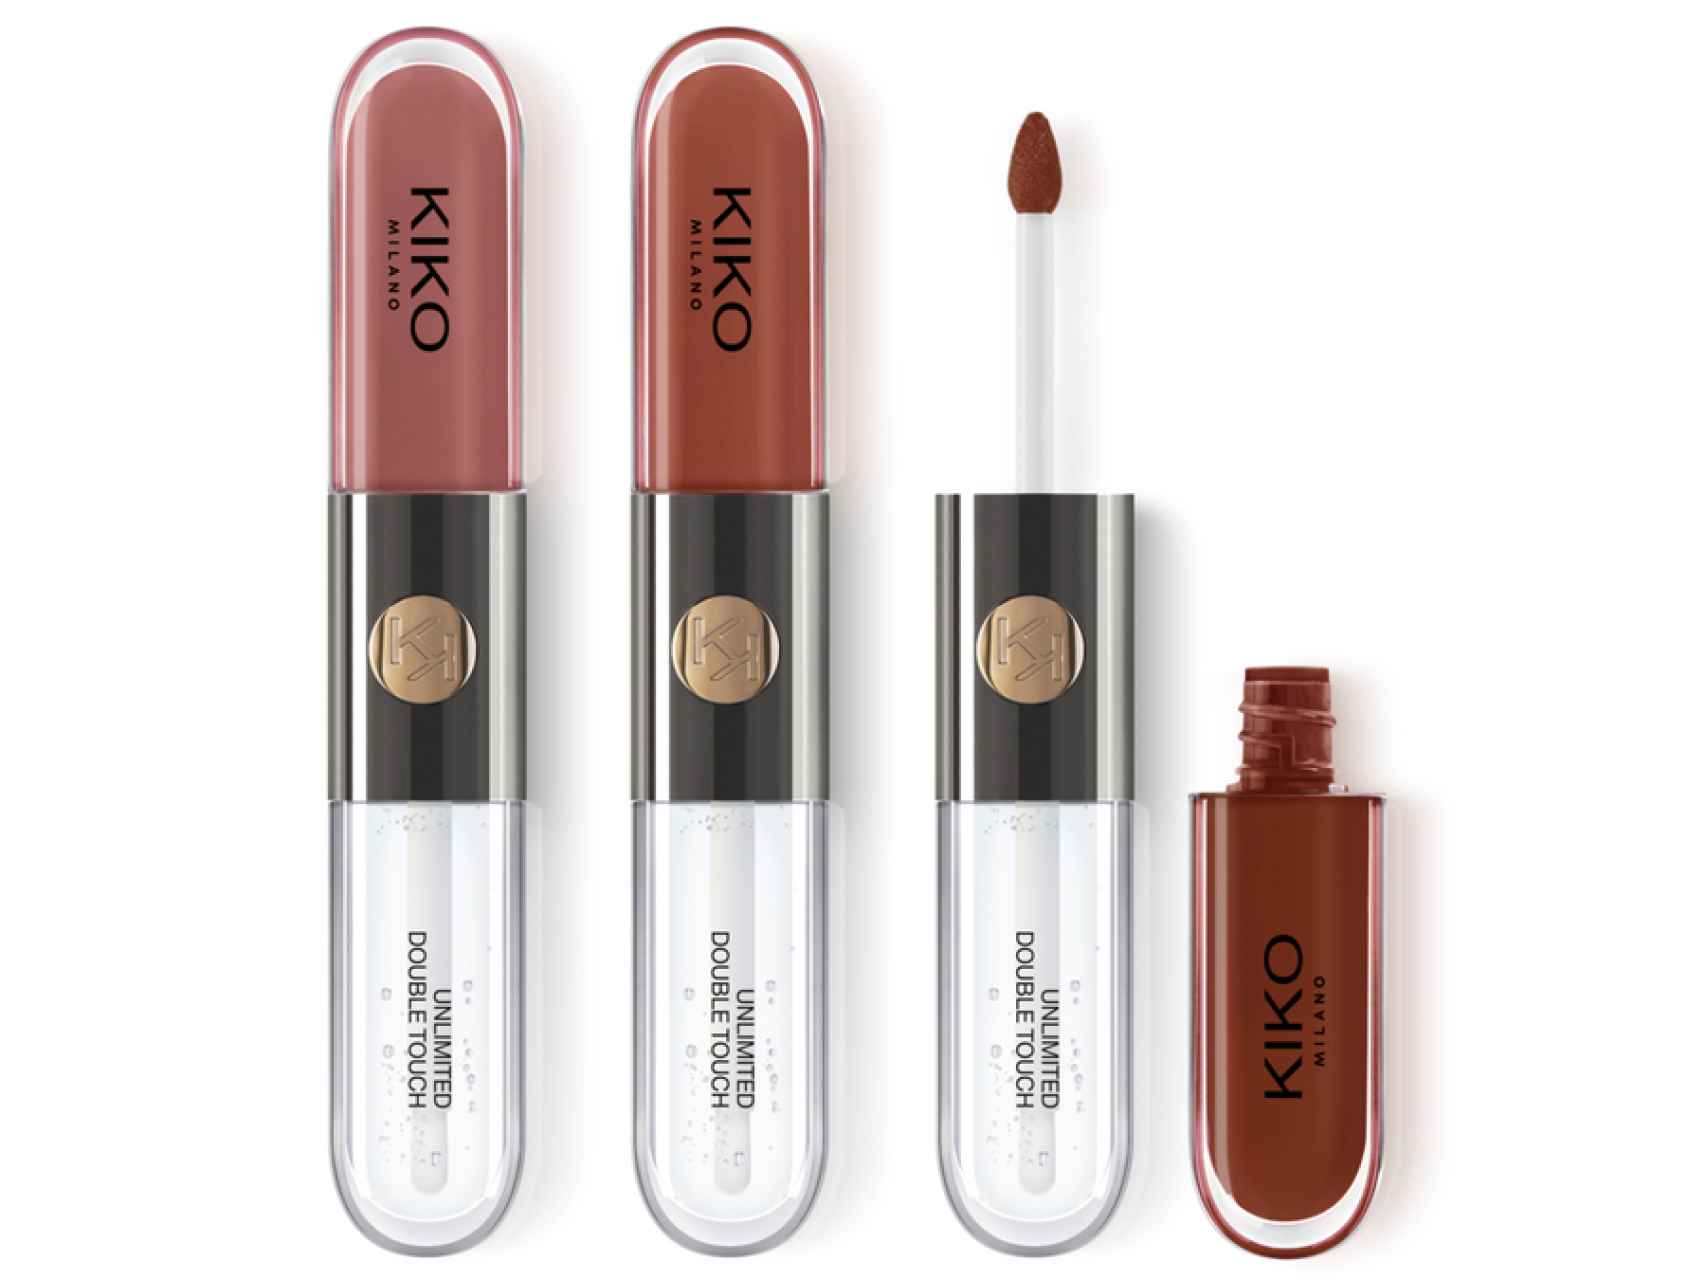 Unlimited Double Touch Lipstick Kit.